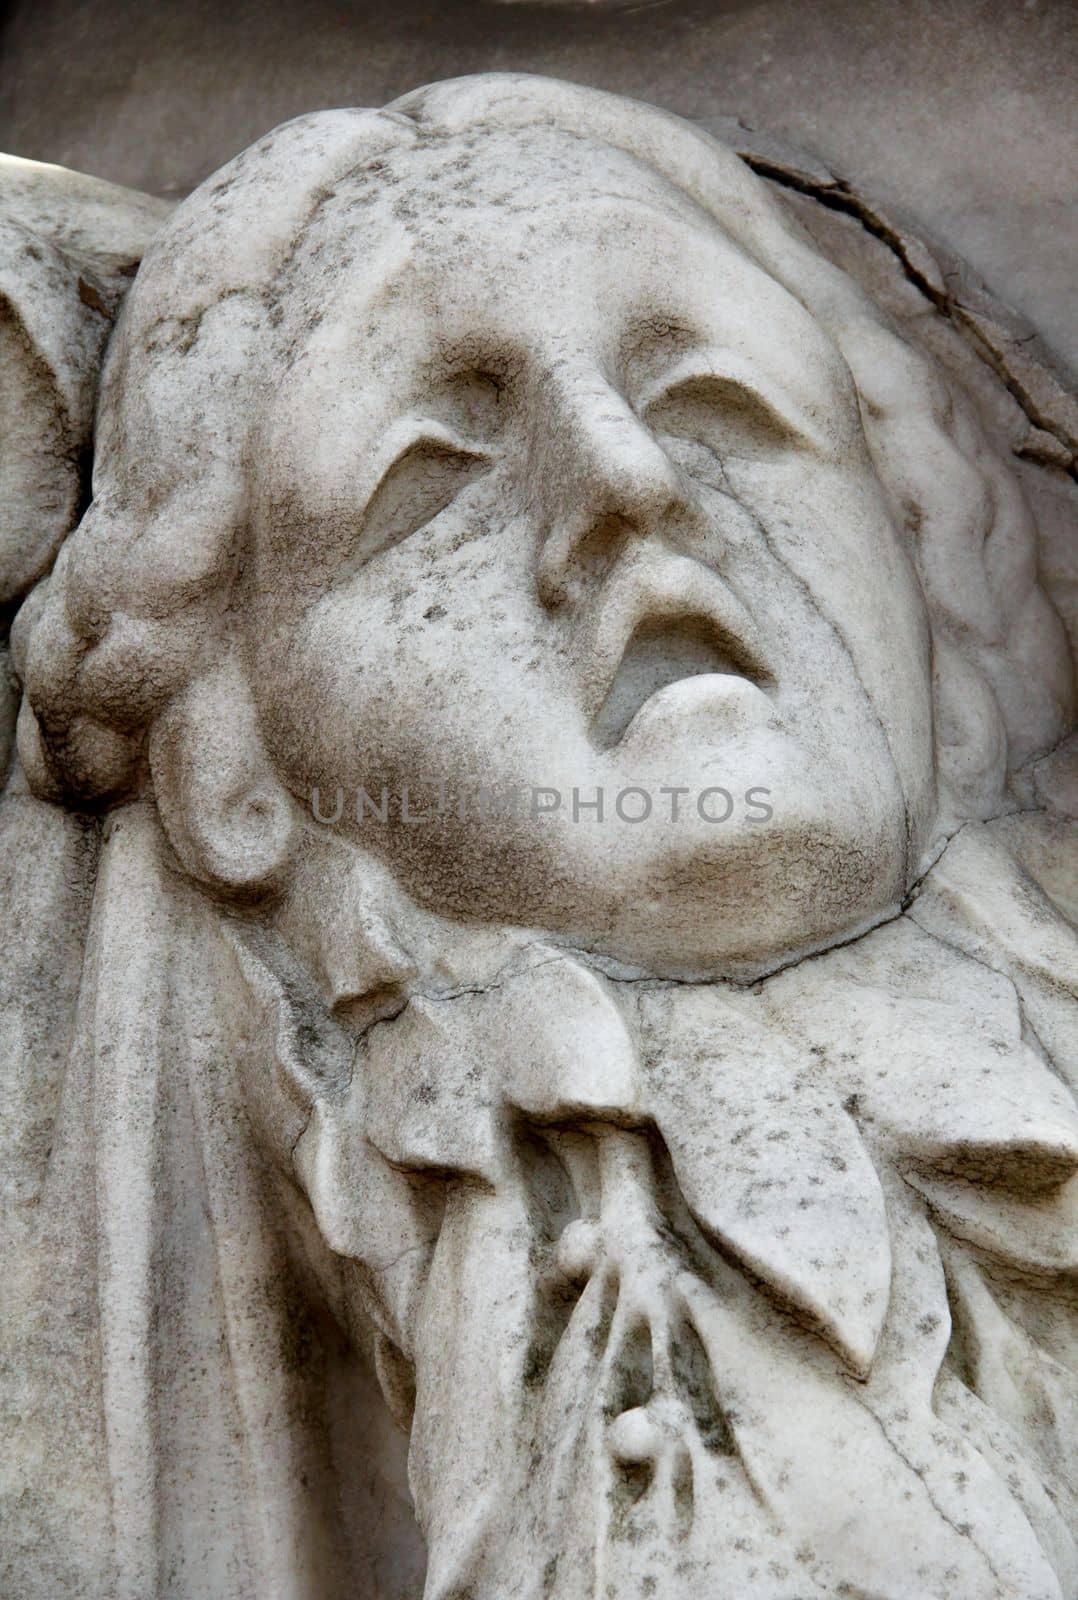 Statue of woman on tomb as a symbol of depression pain and sorrow by gallofoto